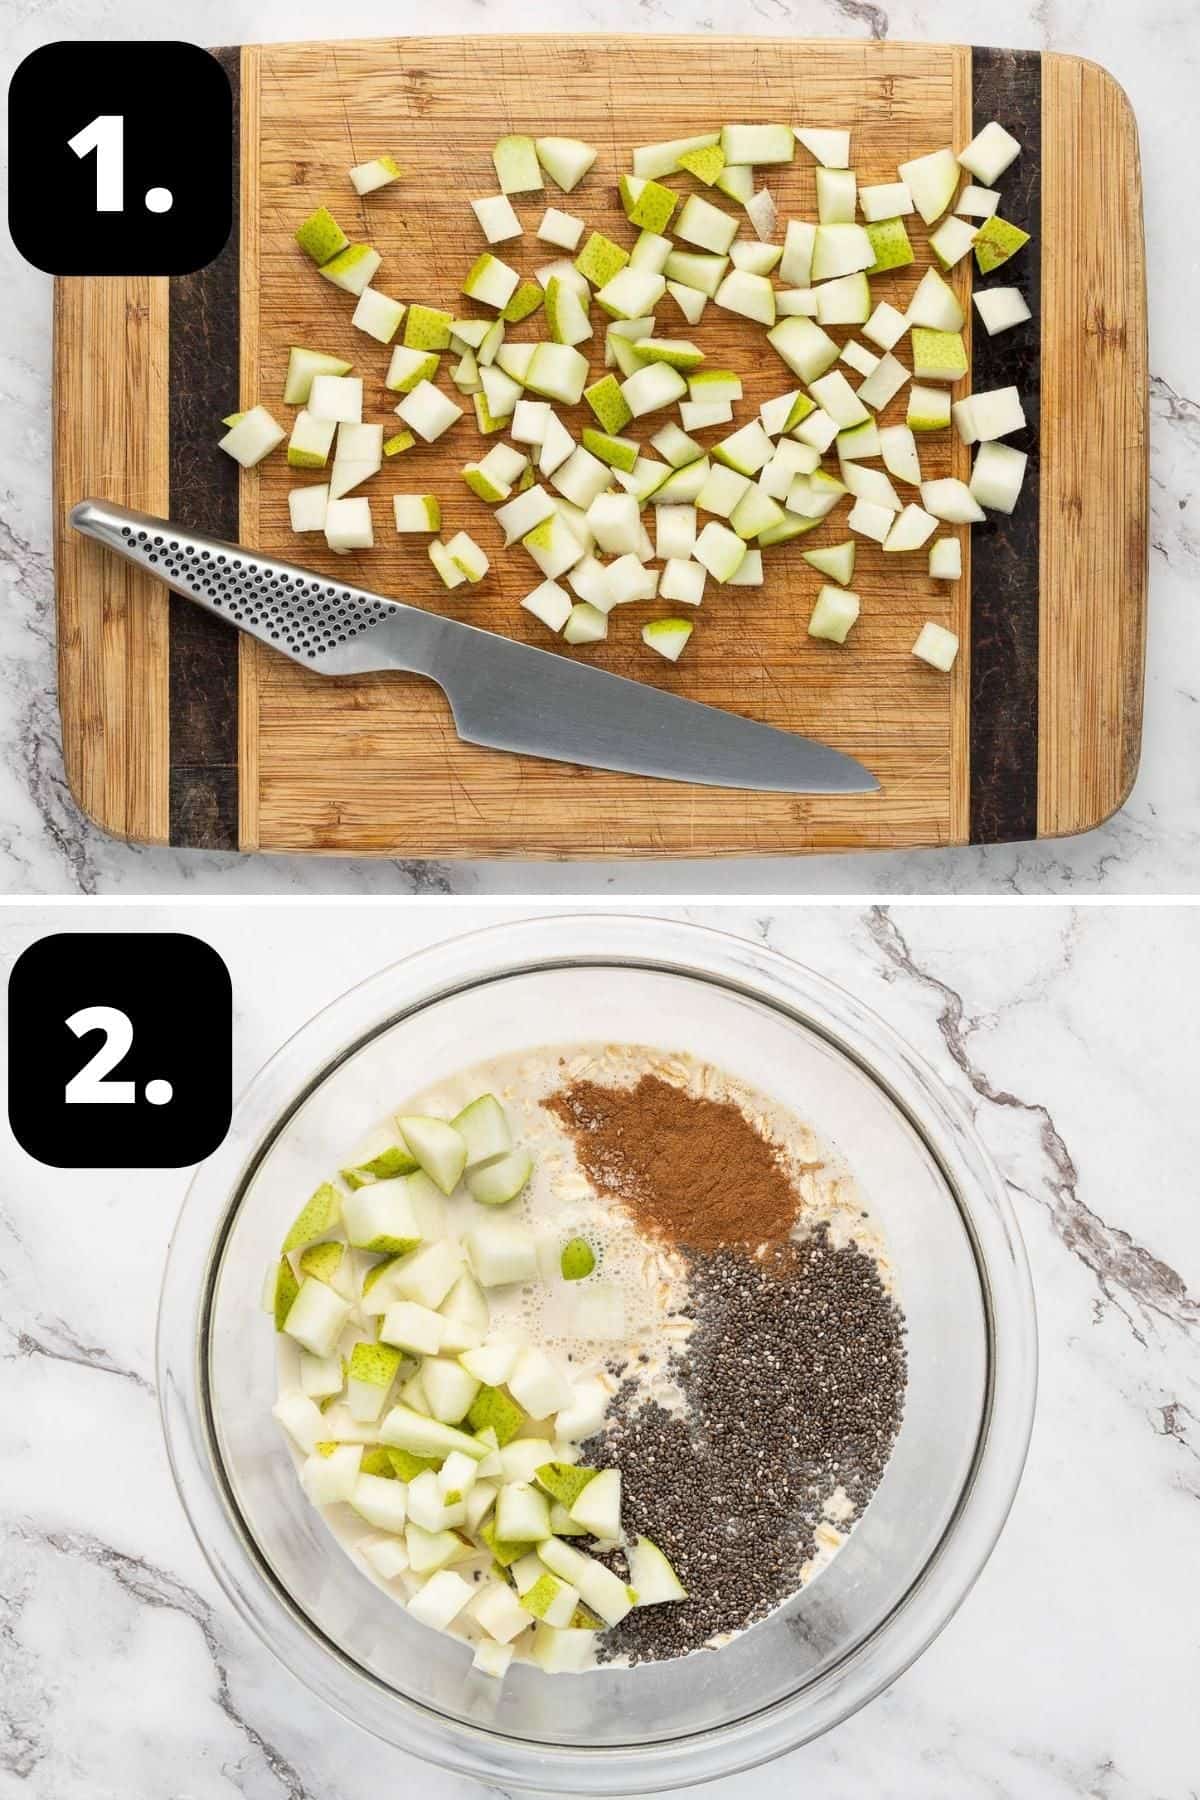 Steps 1-2 of preparing this recipe - chopping up the pear and adding all of the ingredients to a bowl.